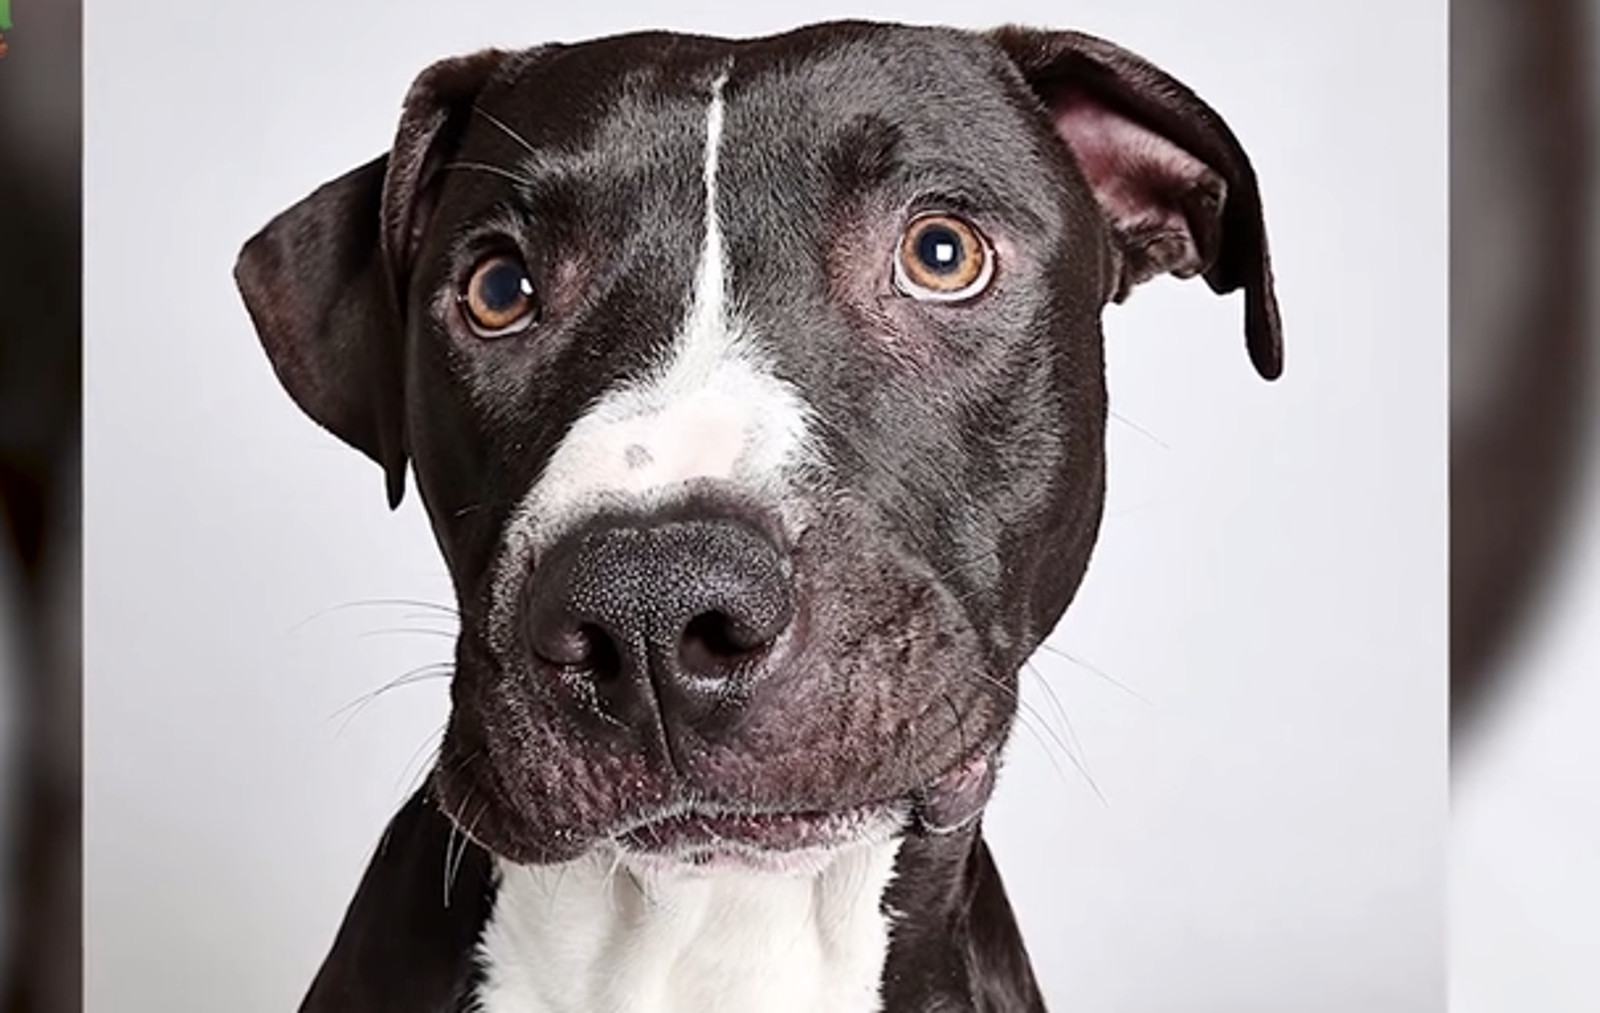 Animal Shelter Stunning Photo Booth Pictures to Help Find Loving Forever Homes for Dogs (VIDEO)